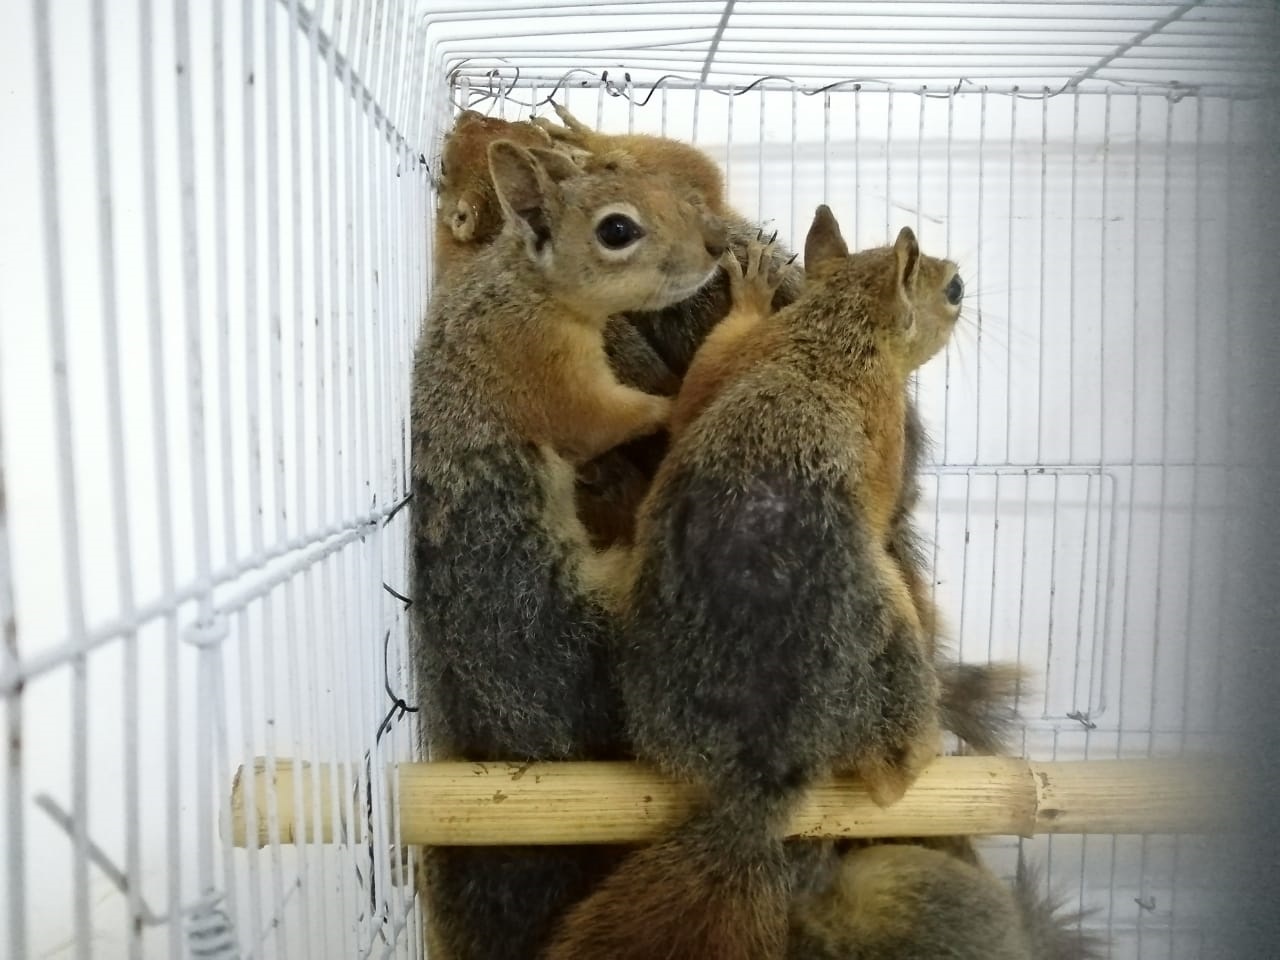 Squirrels as they arrived to NHC